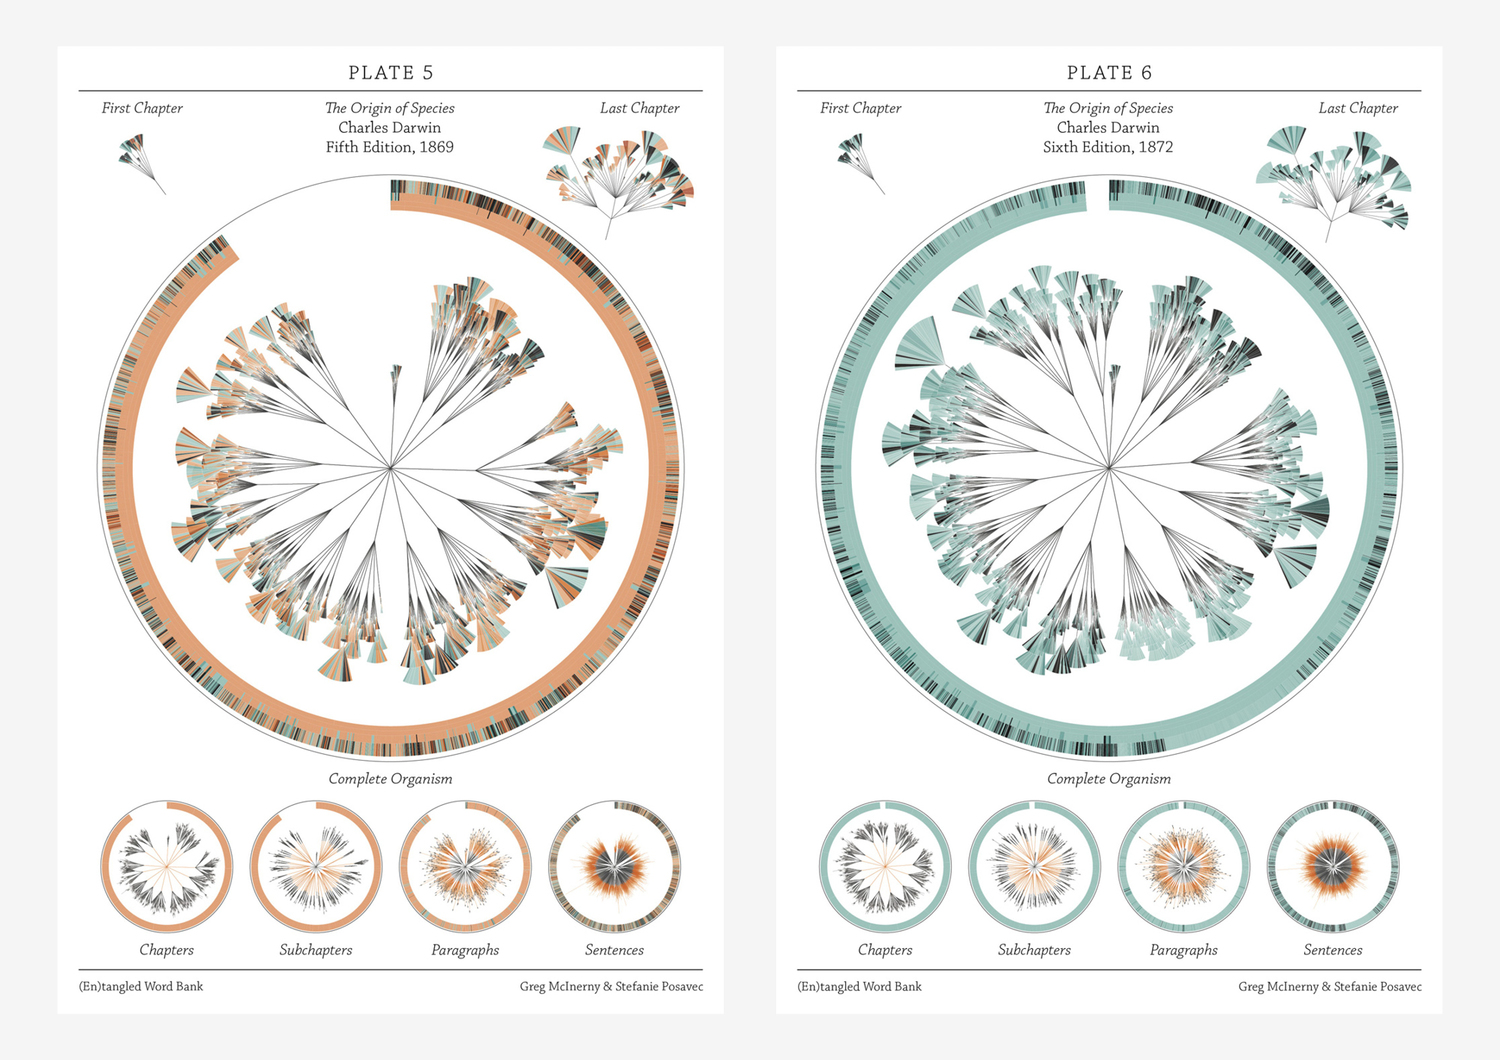 There is grandeur in this view of life – visualising Darwin